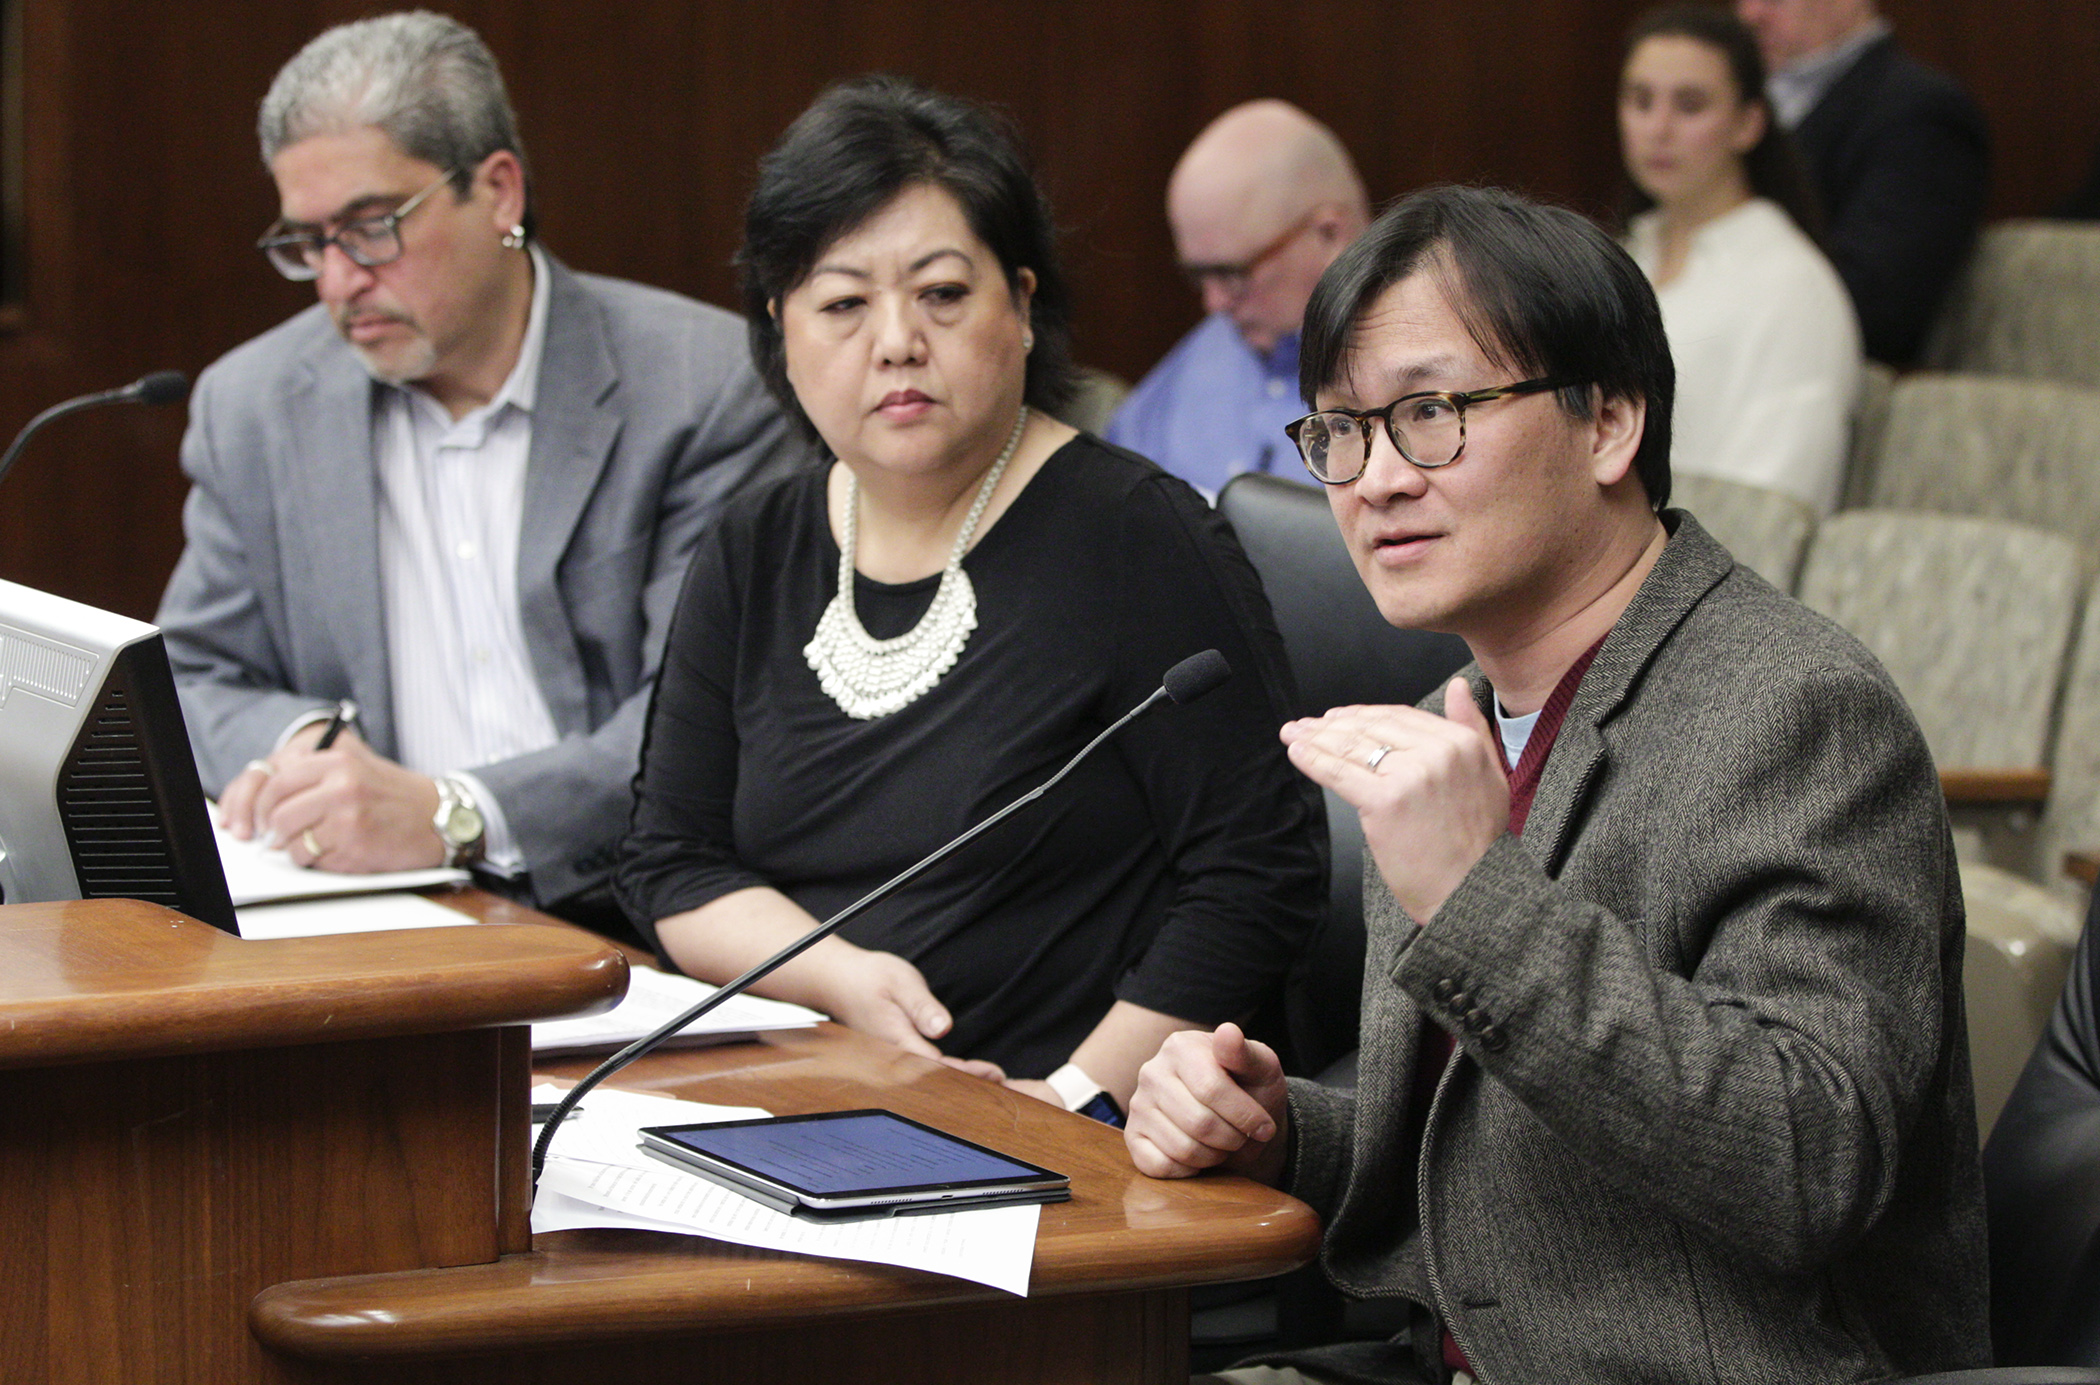 Linus Chan, an associate clinical professor of law at the University of Minnesota, testifies before the House's judiciary and civil law division on HF3975, which would modify petitions for post-conviction relief. Photo by Paul Battaglia